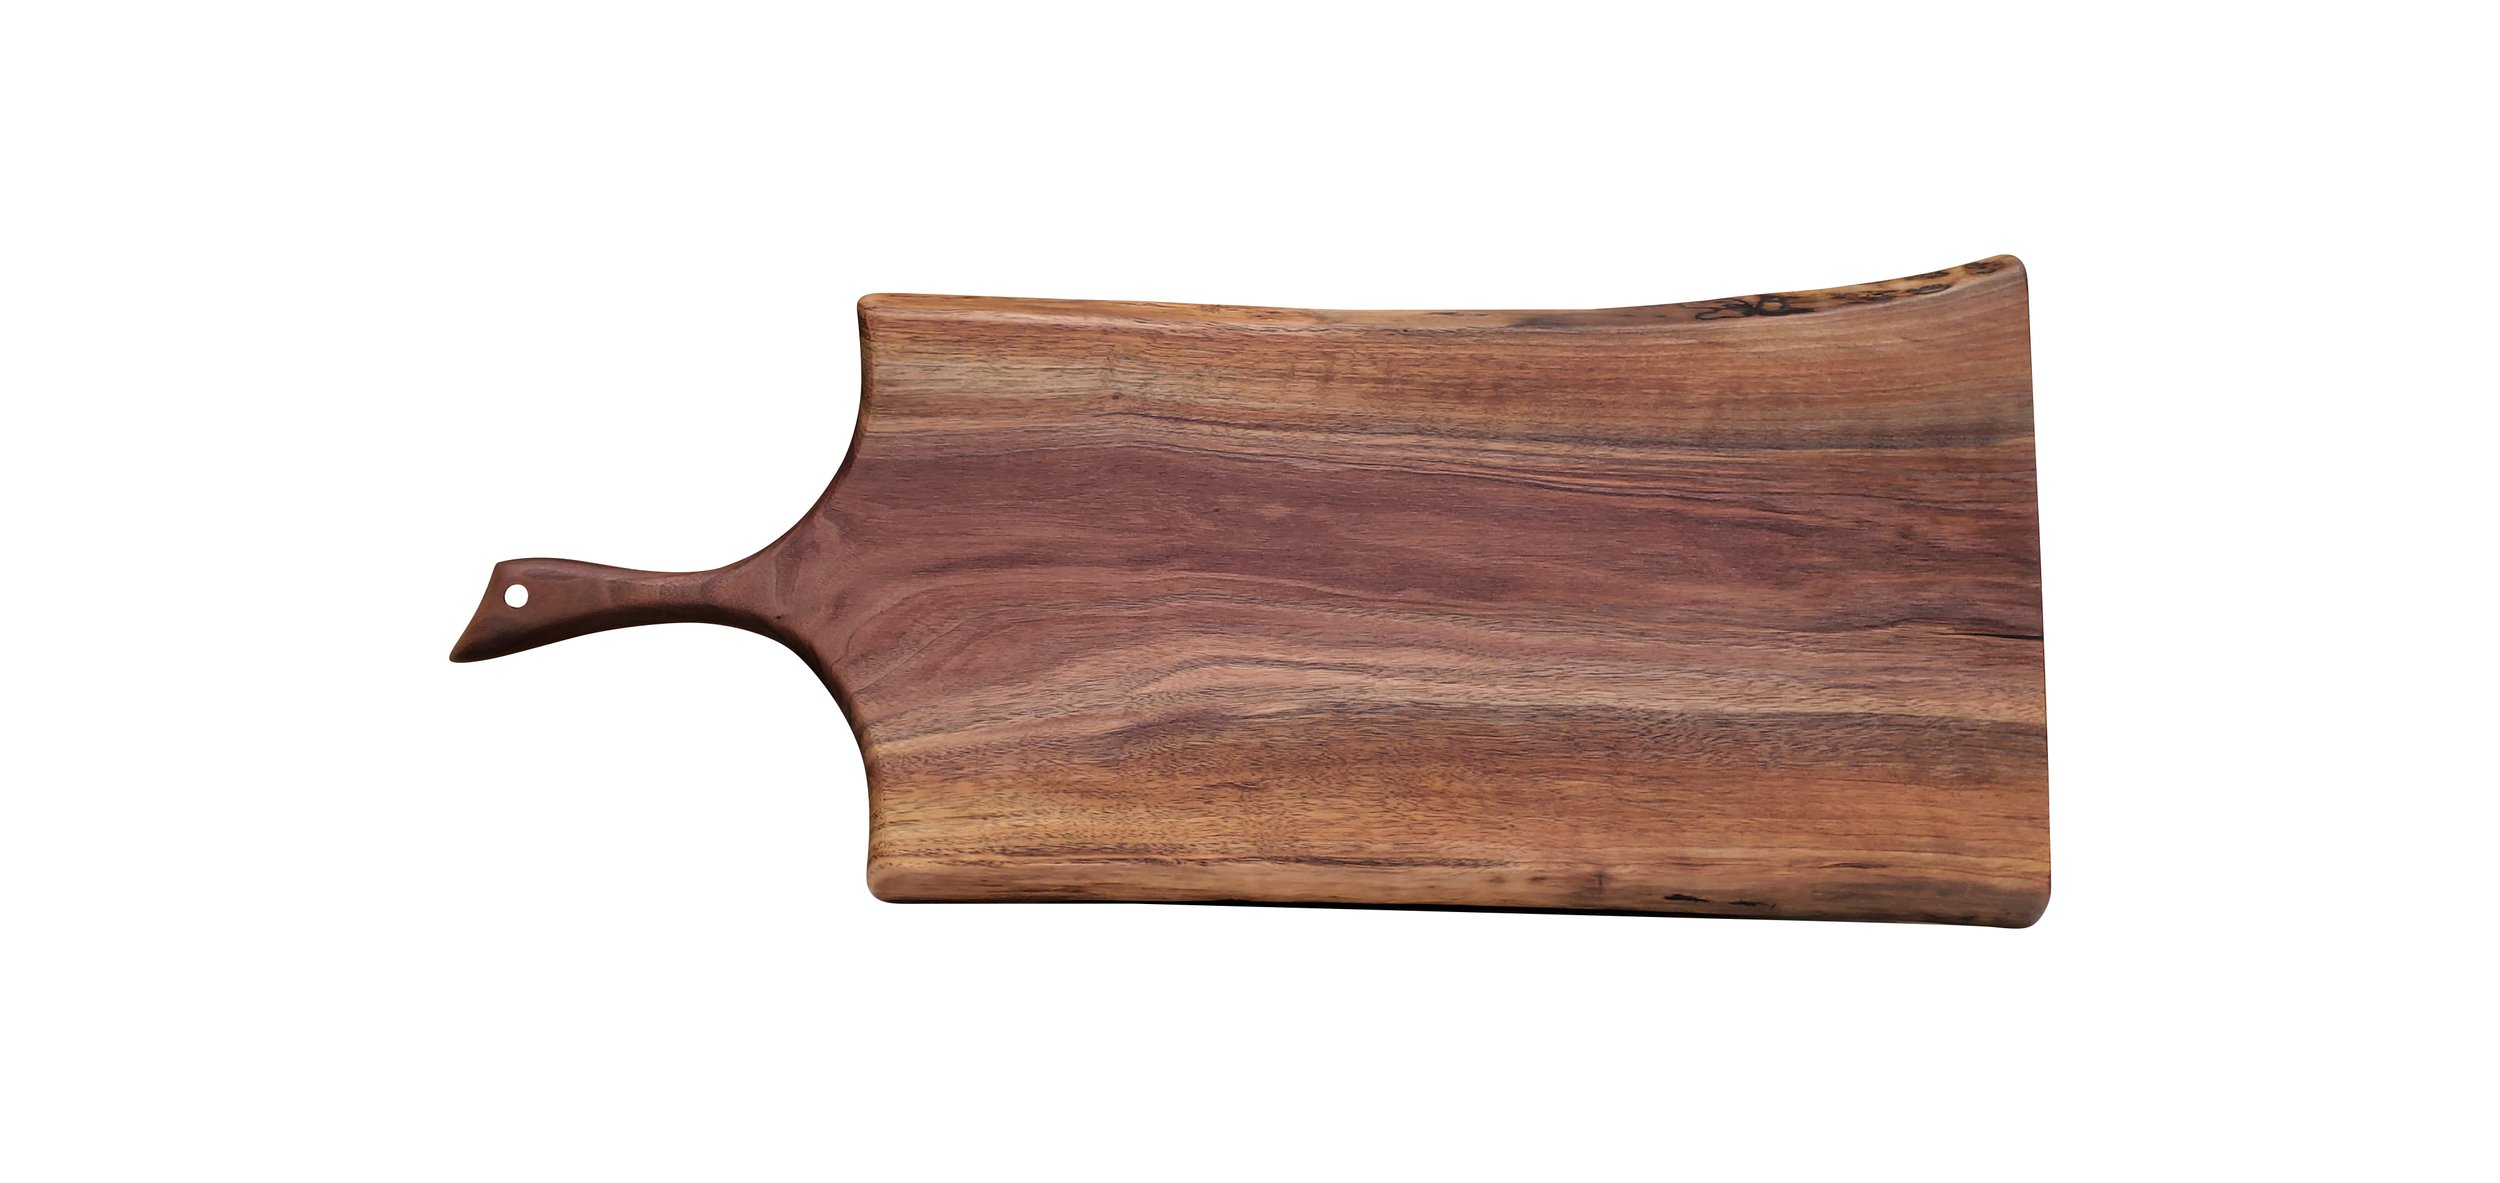 Order Now! Hand Made Wooden Serving/Cutting/charcuterie Boards in